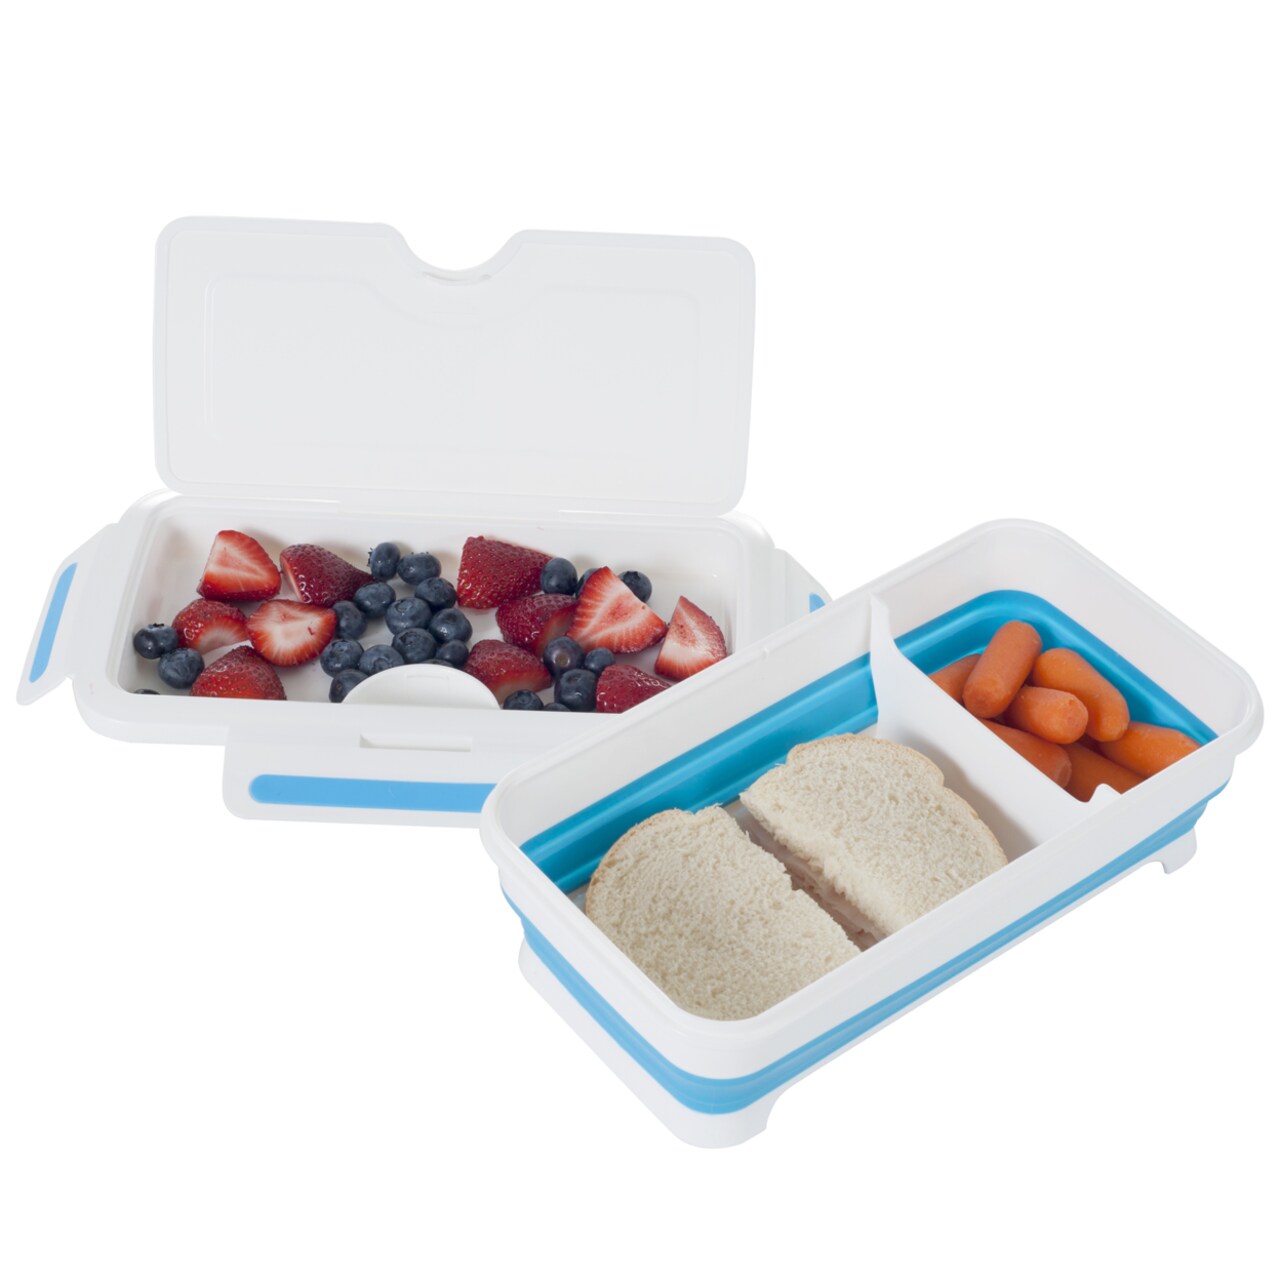 Classic Cuisine Rectangular Expandable Lunch Box with Dividers